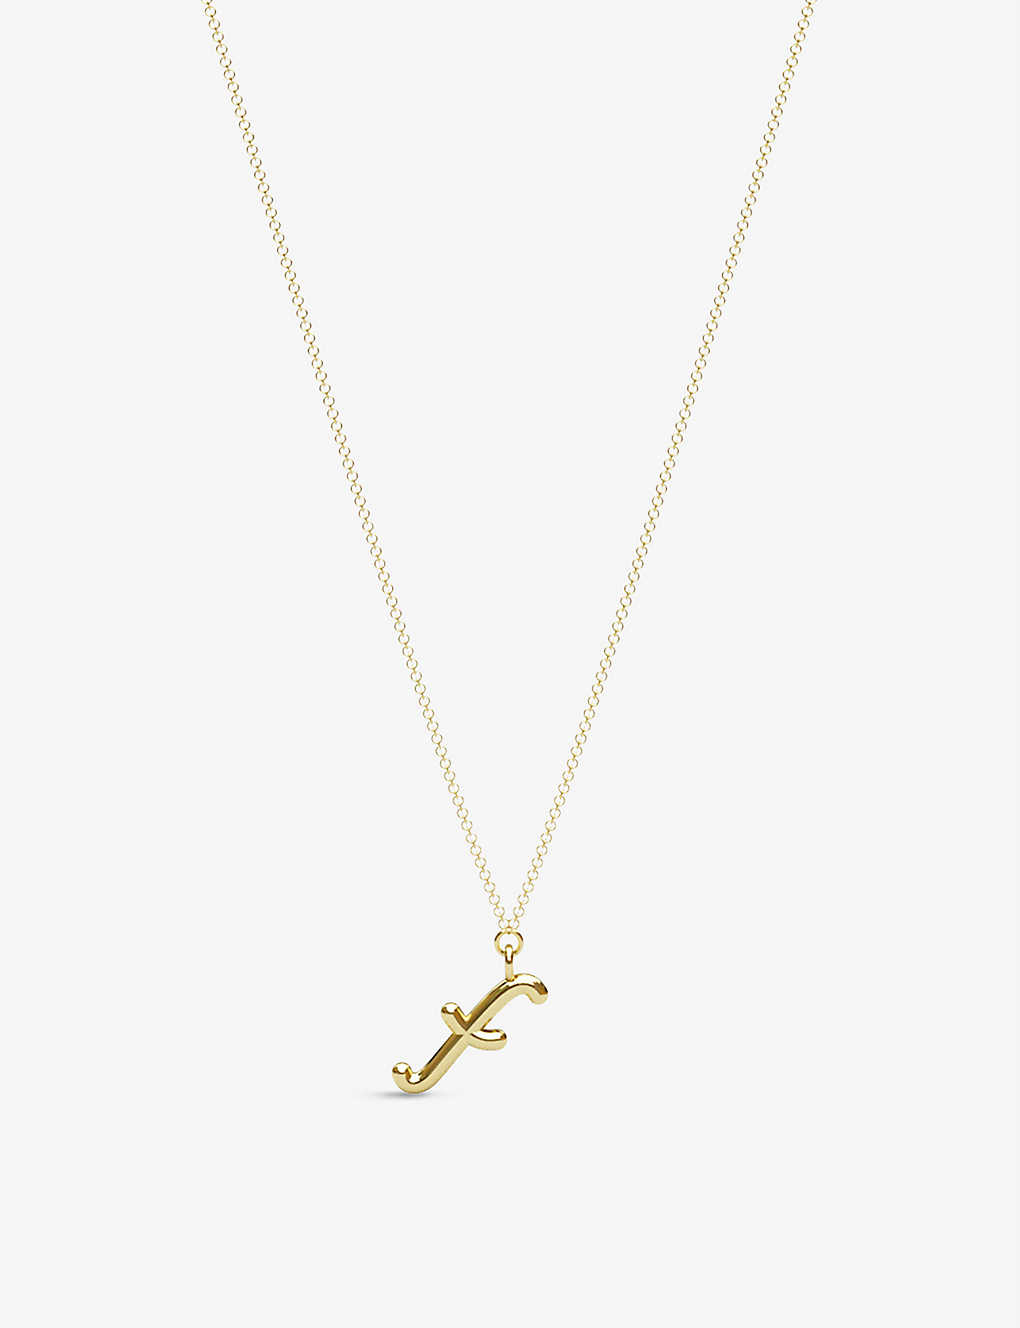 Shop The Alkemistry Womens 18ct Yellow Gold Love Letter F Initial 18ct Yellow-gold Pendant Necklace